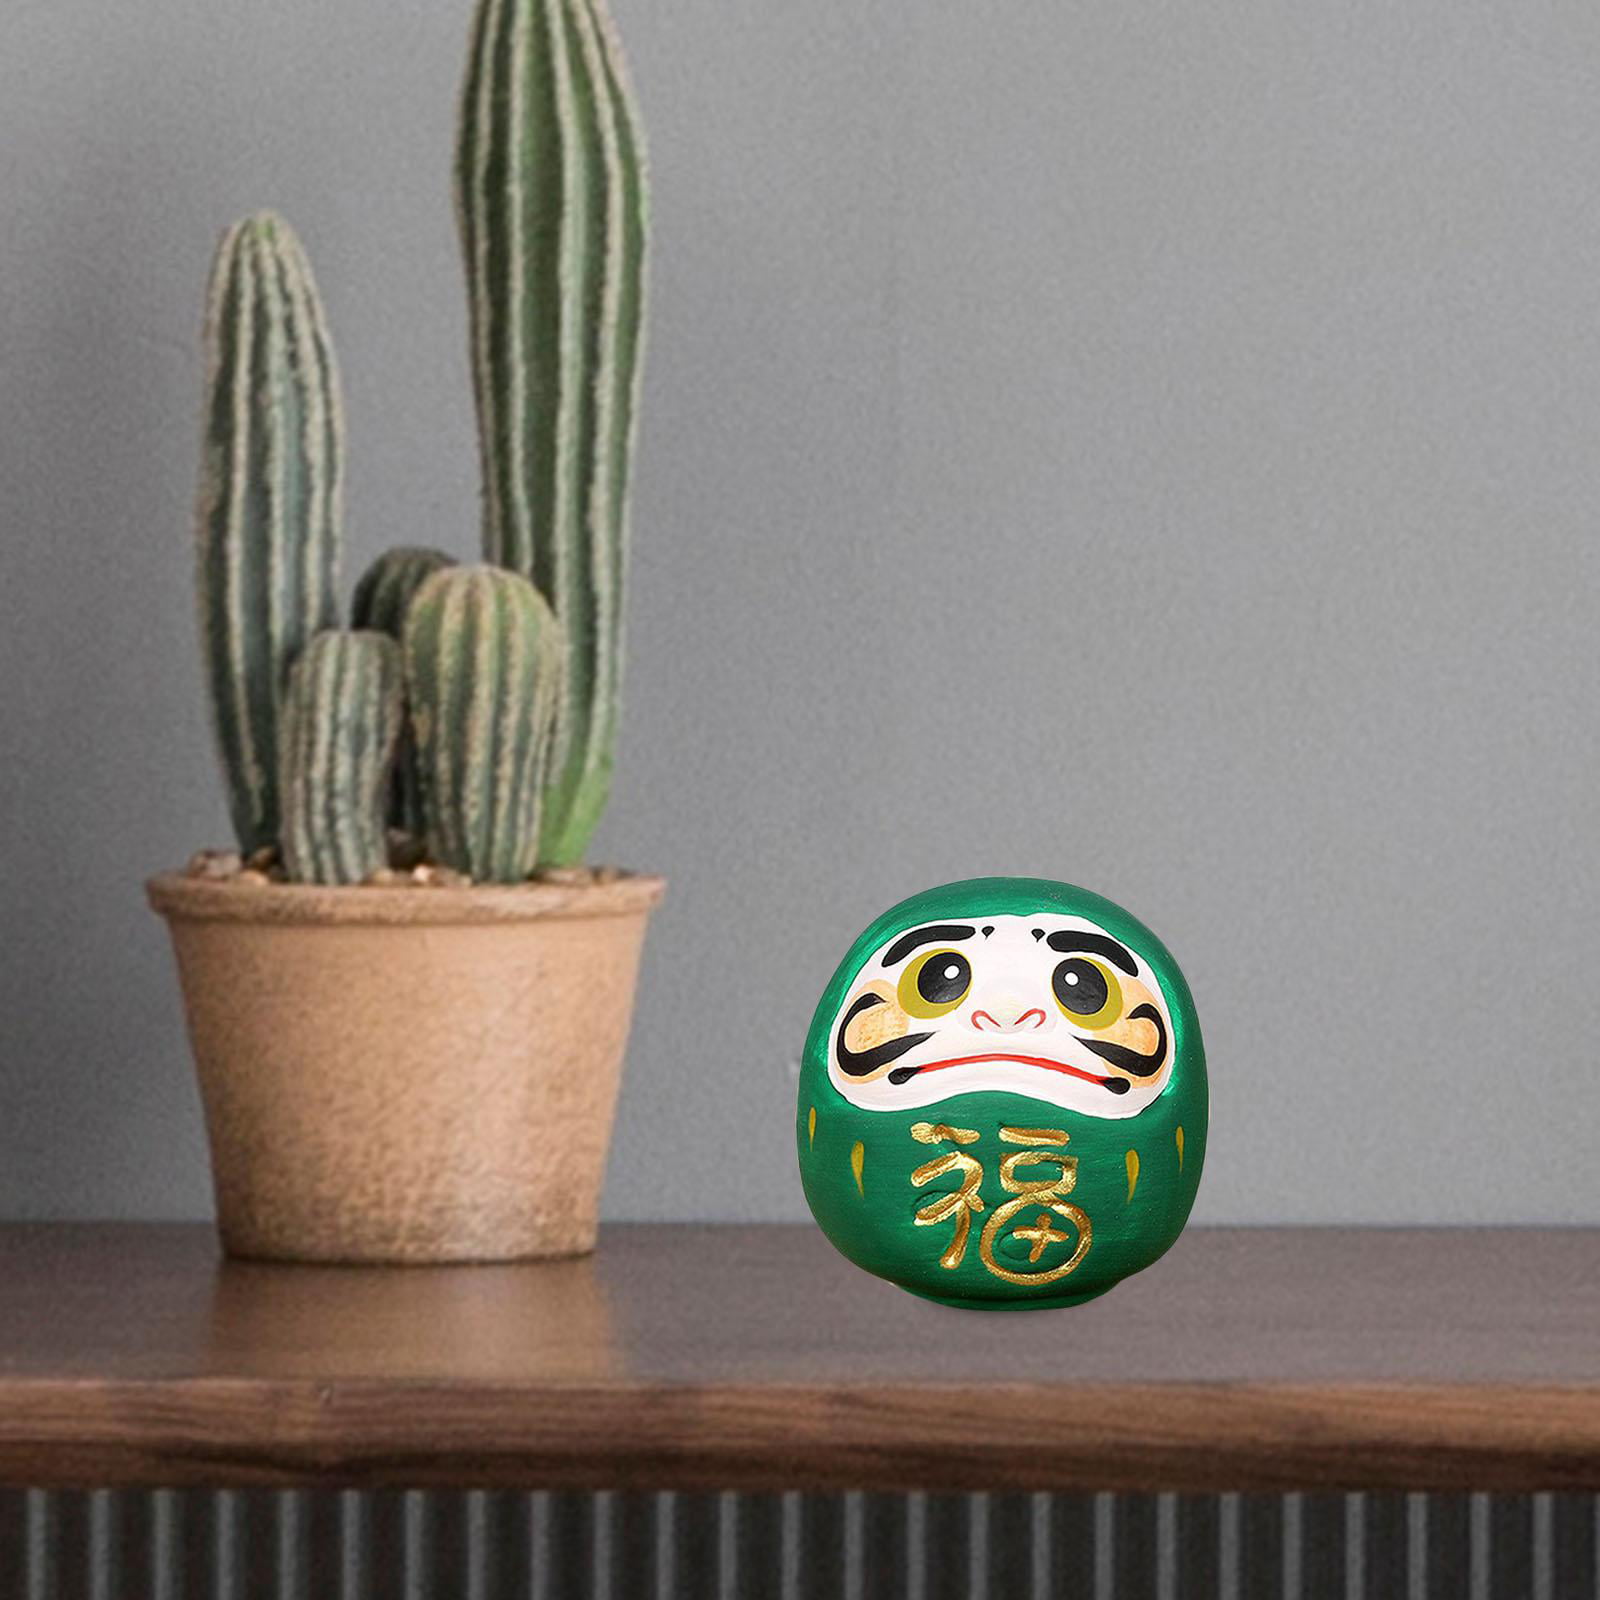 Japanese Traditional Style Daruma Doll, Interior Ornament Creative Craft Collectible Art Figurine for Table Cabinet Bookshelf Cafe, Size: 4.5 cm